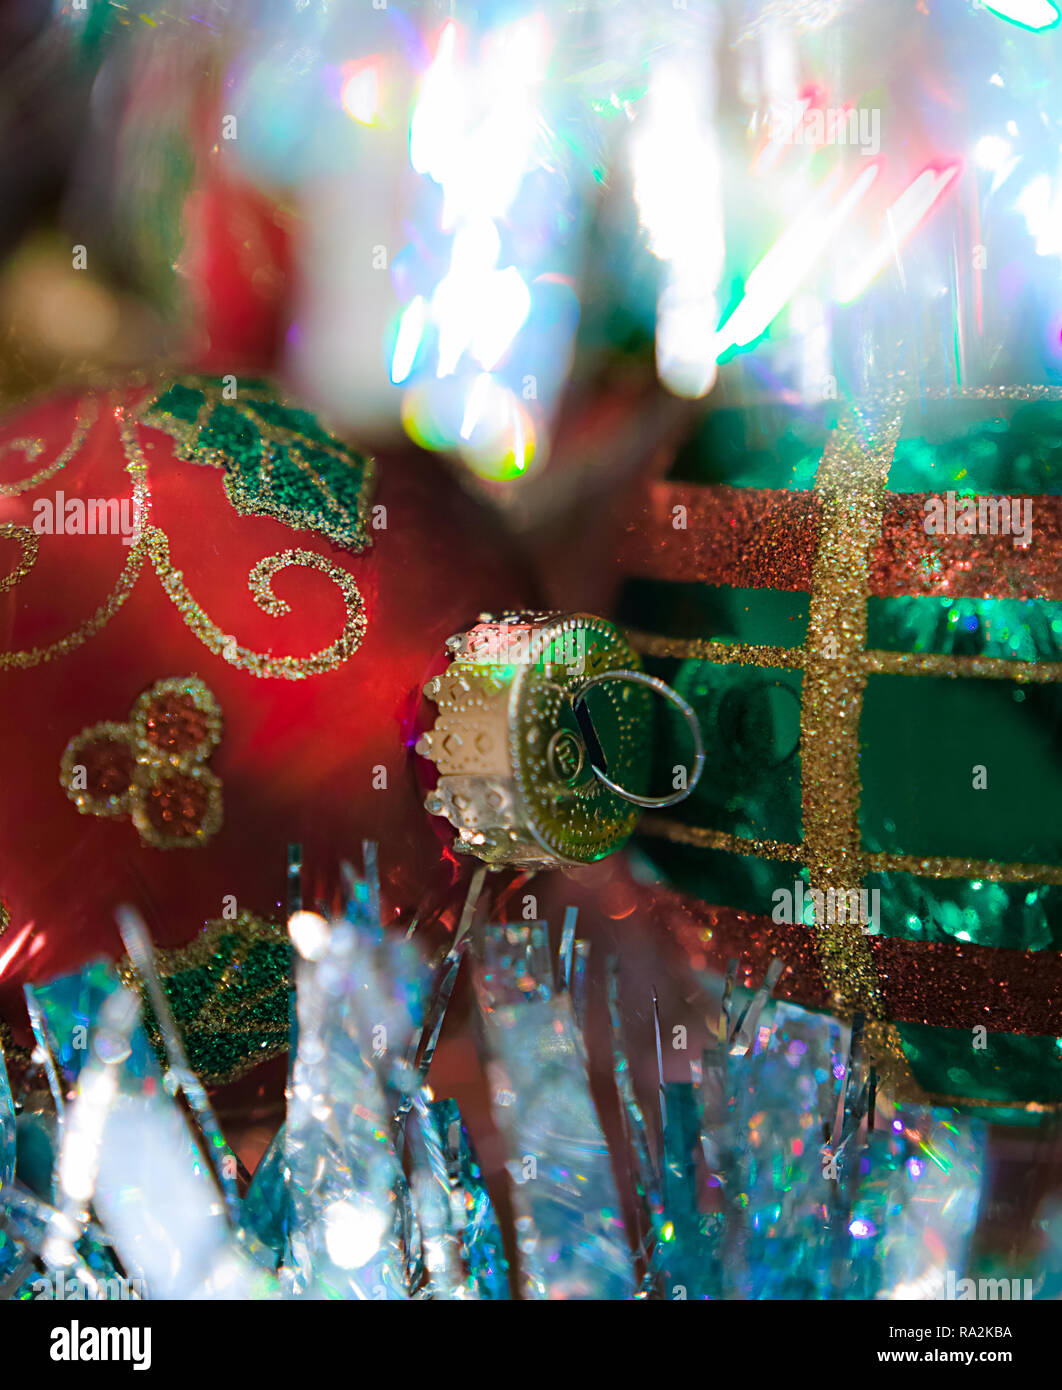 Two richly decorated, one red, one green, Christmas balls in close up. Stock Photo